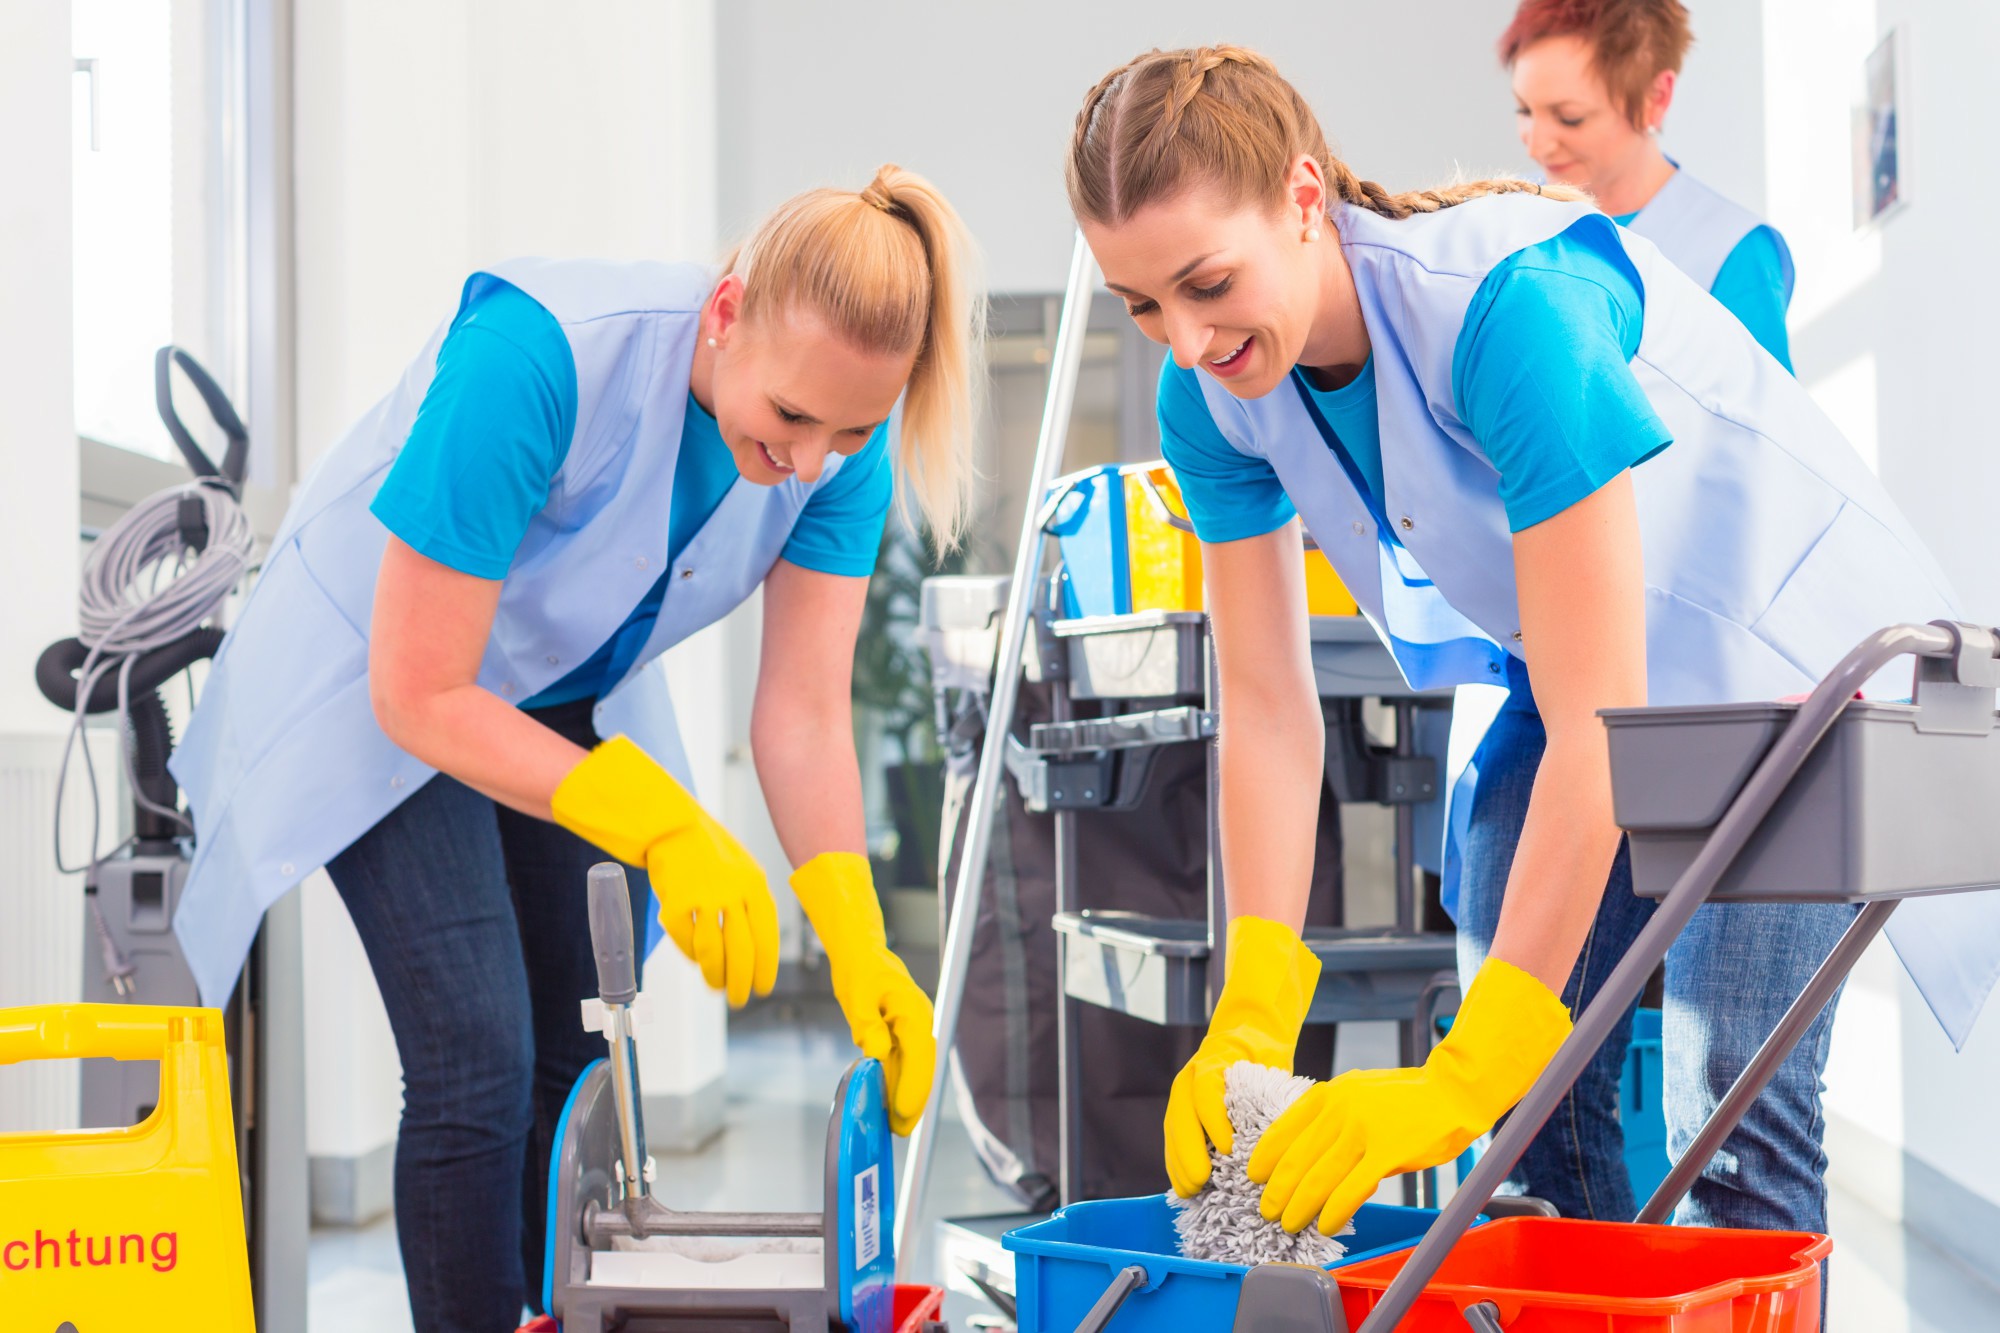 Commercial Office Cleaning: 5 Important Tips for Health and Safety